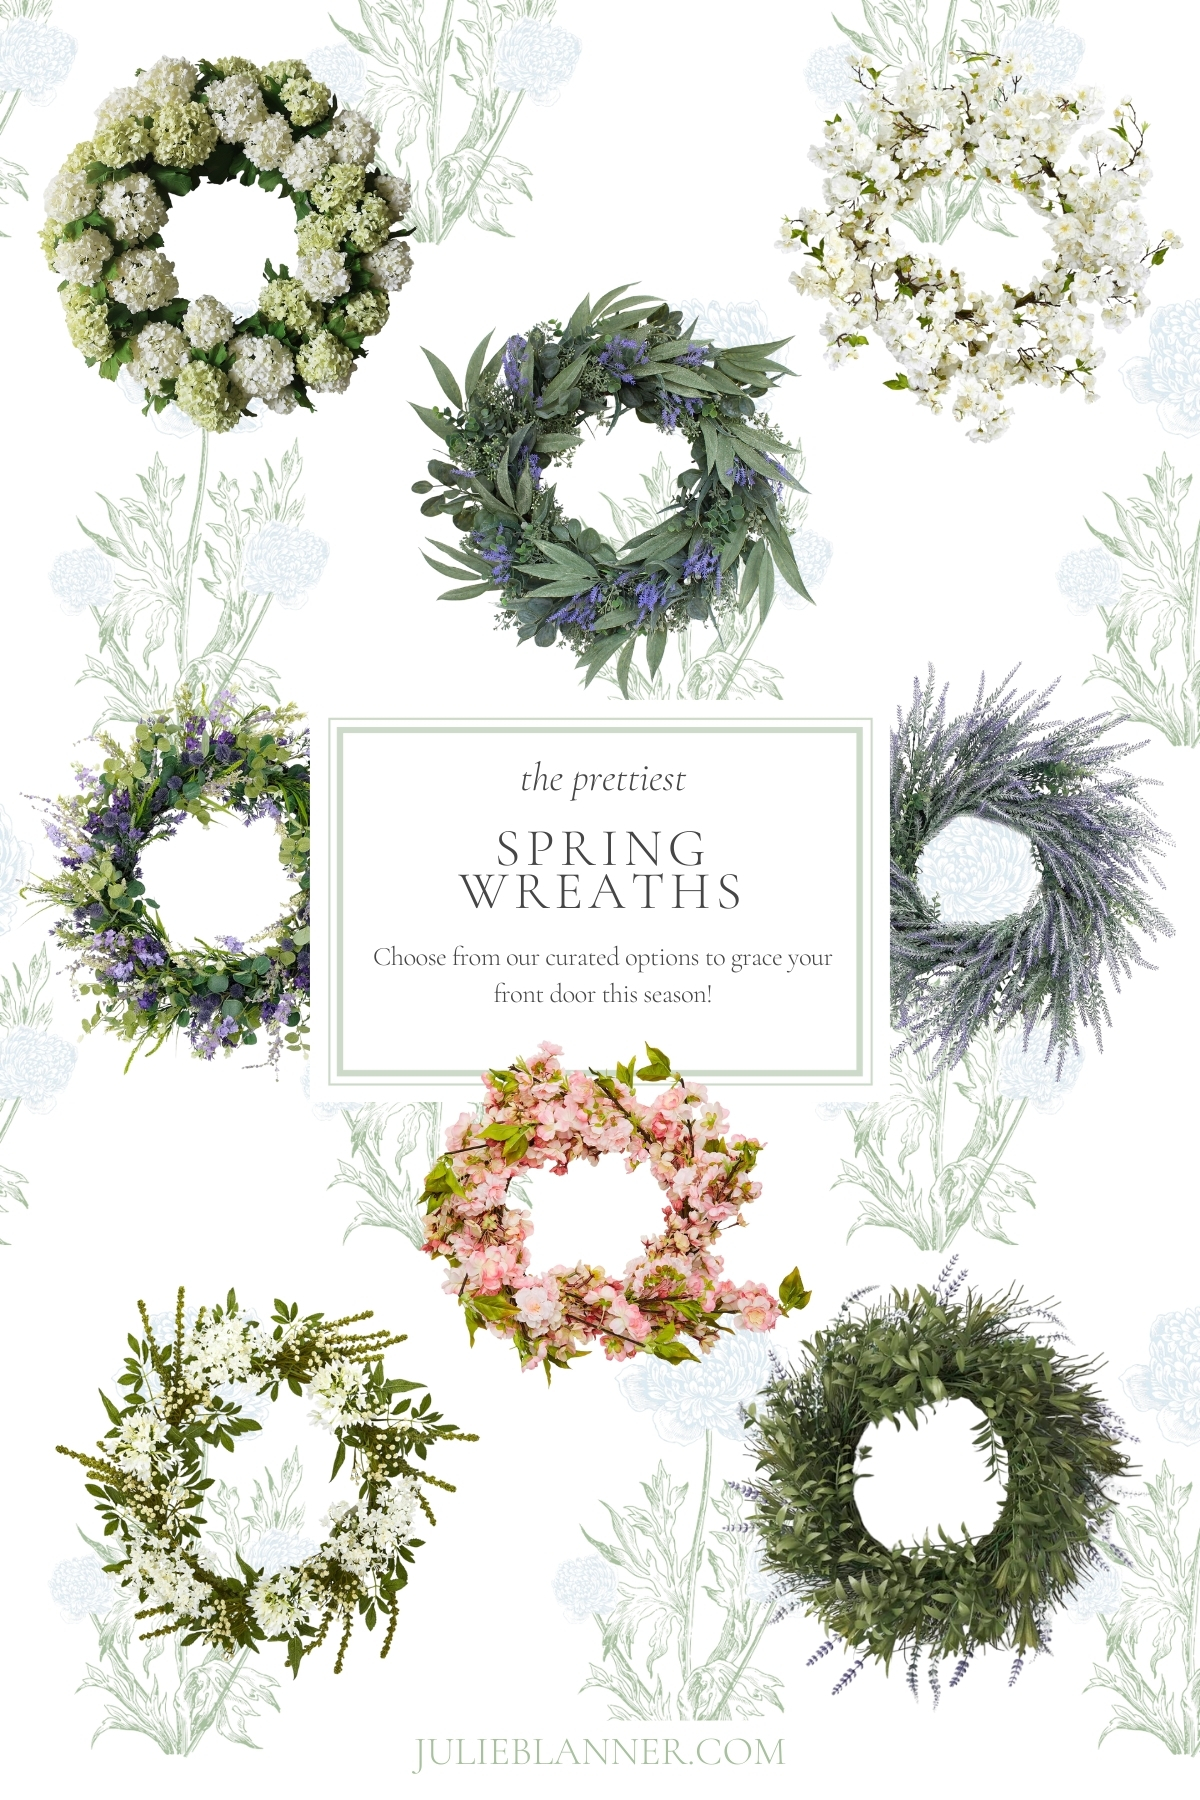 A collection of spring wreaths on a clean white background.